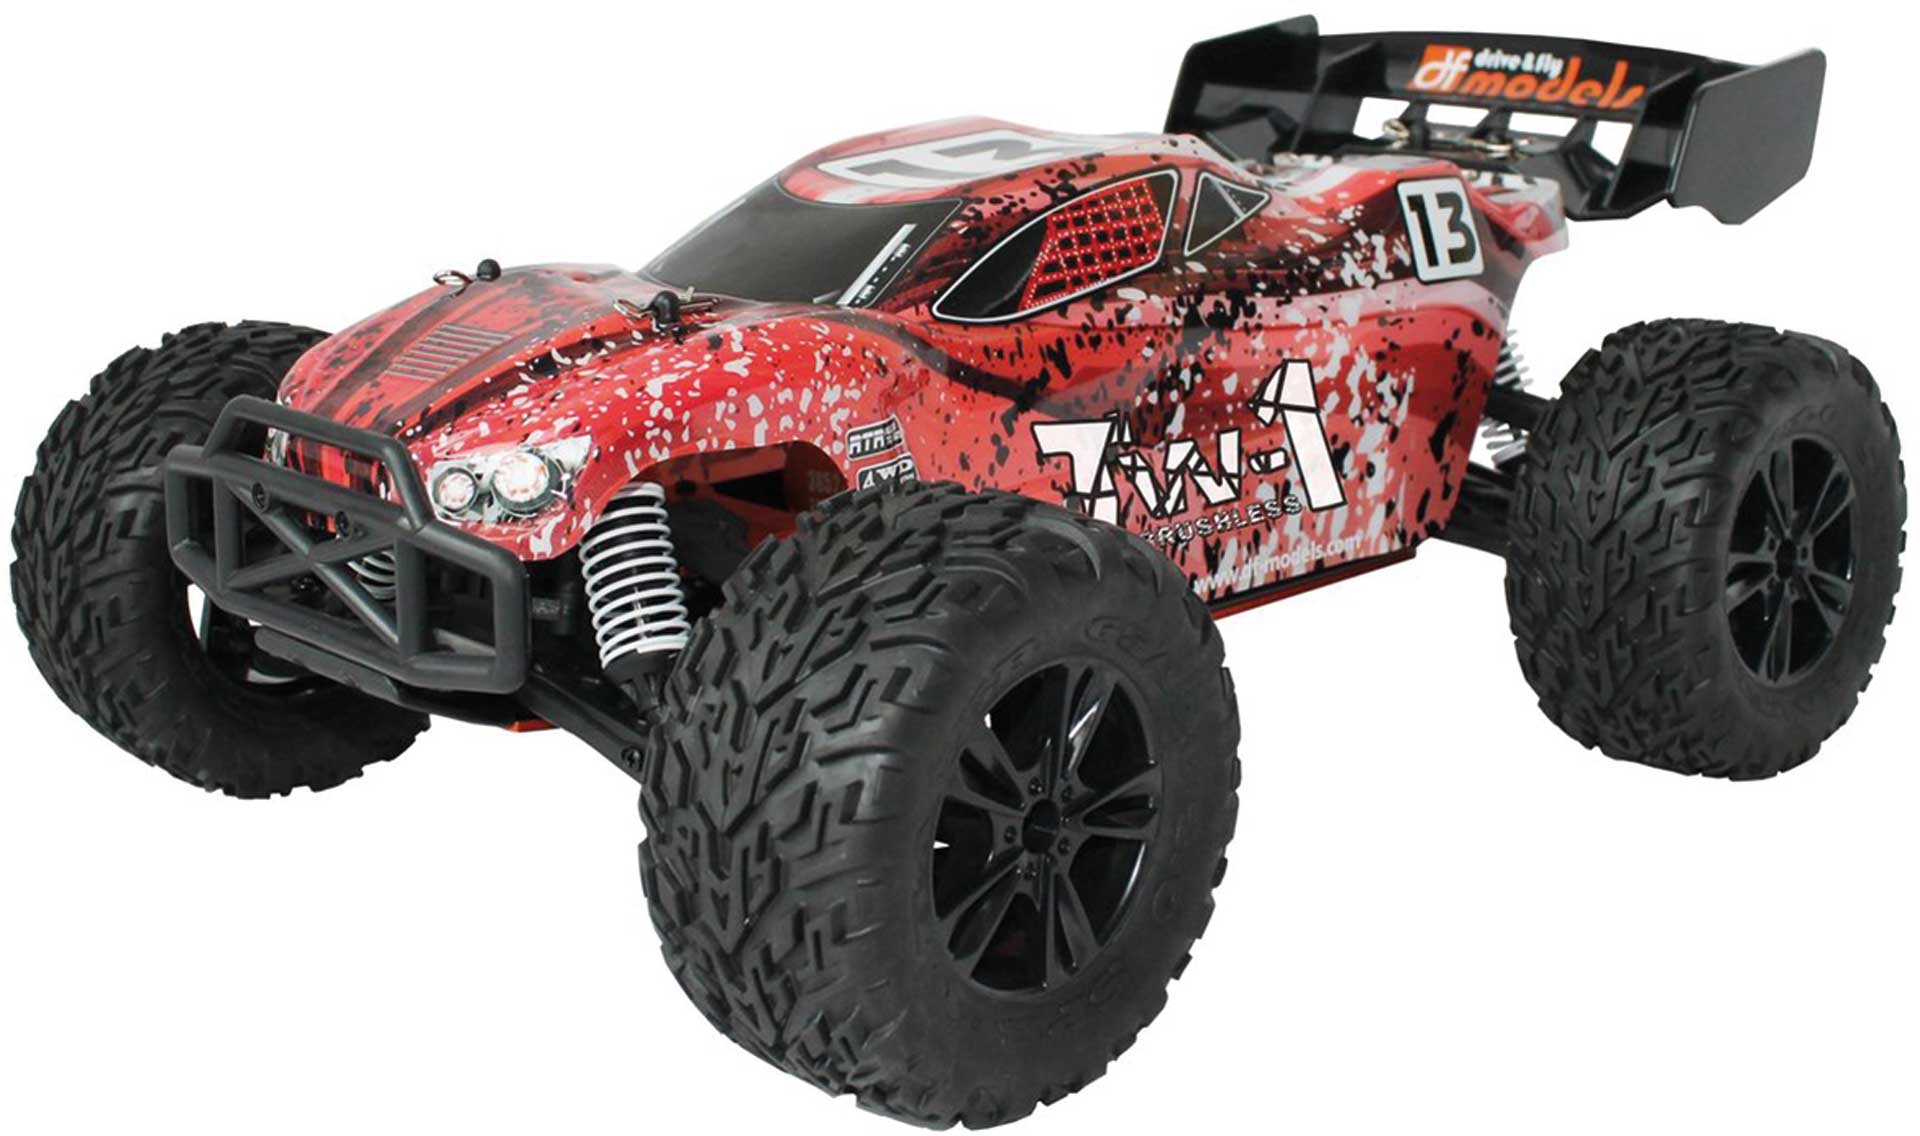 DRIVE & FLY MODELS TW-1 BL TRUGGY RTR BRUSHLESS 4WD 1/10XL ROT